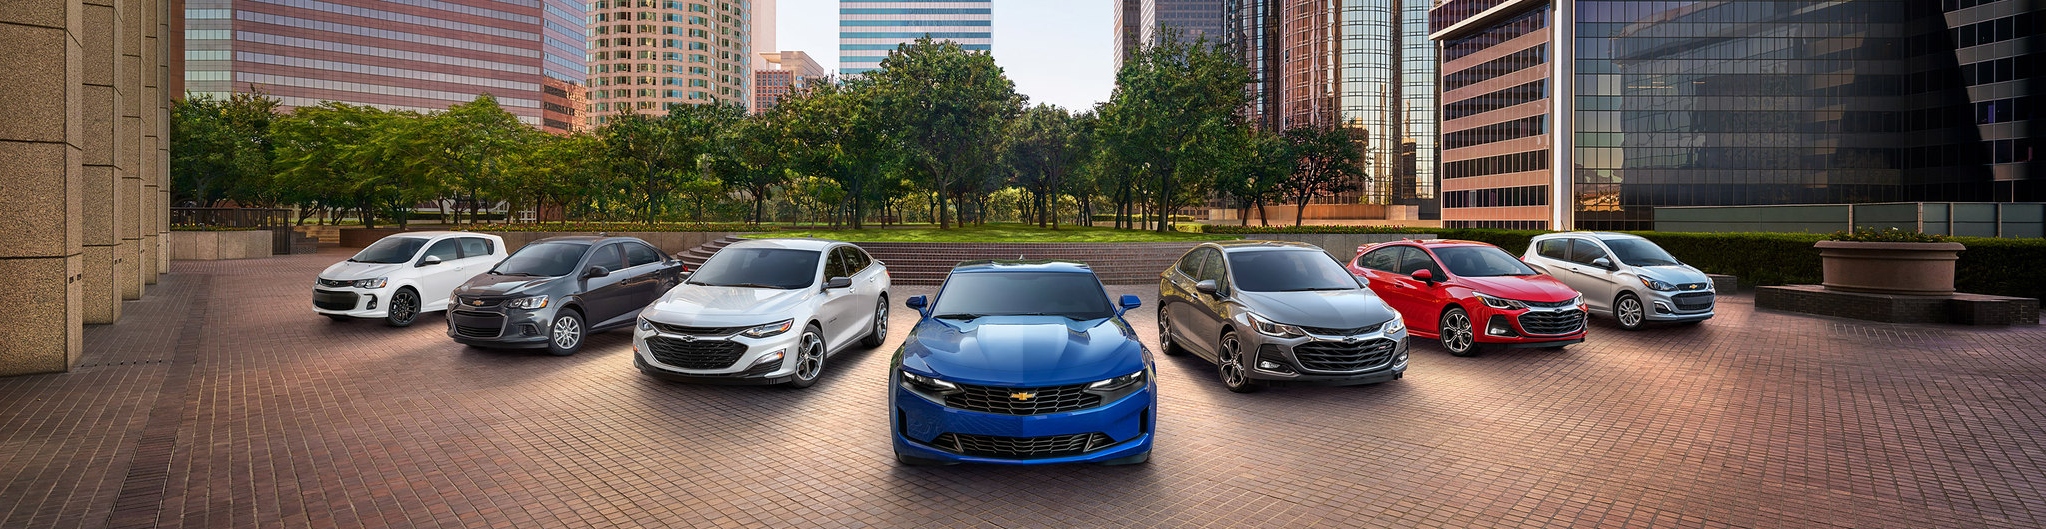 Why Buy a Pre-Owned Chevrolet Car in Newport News, VA